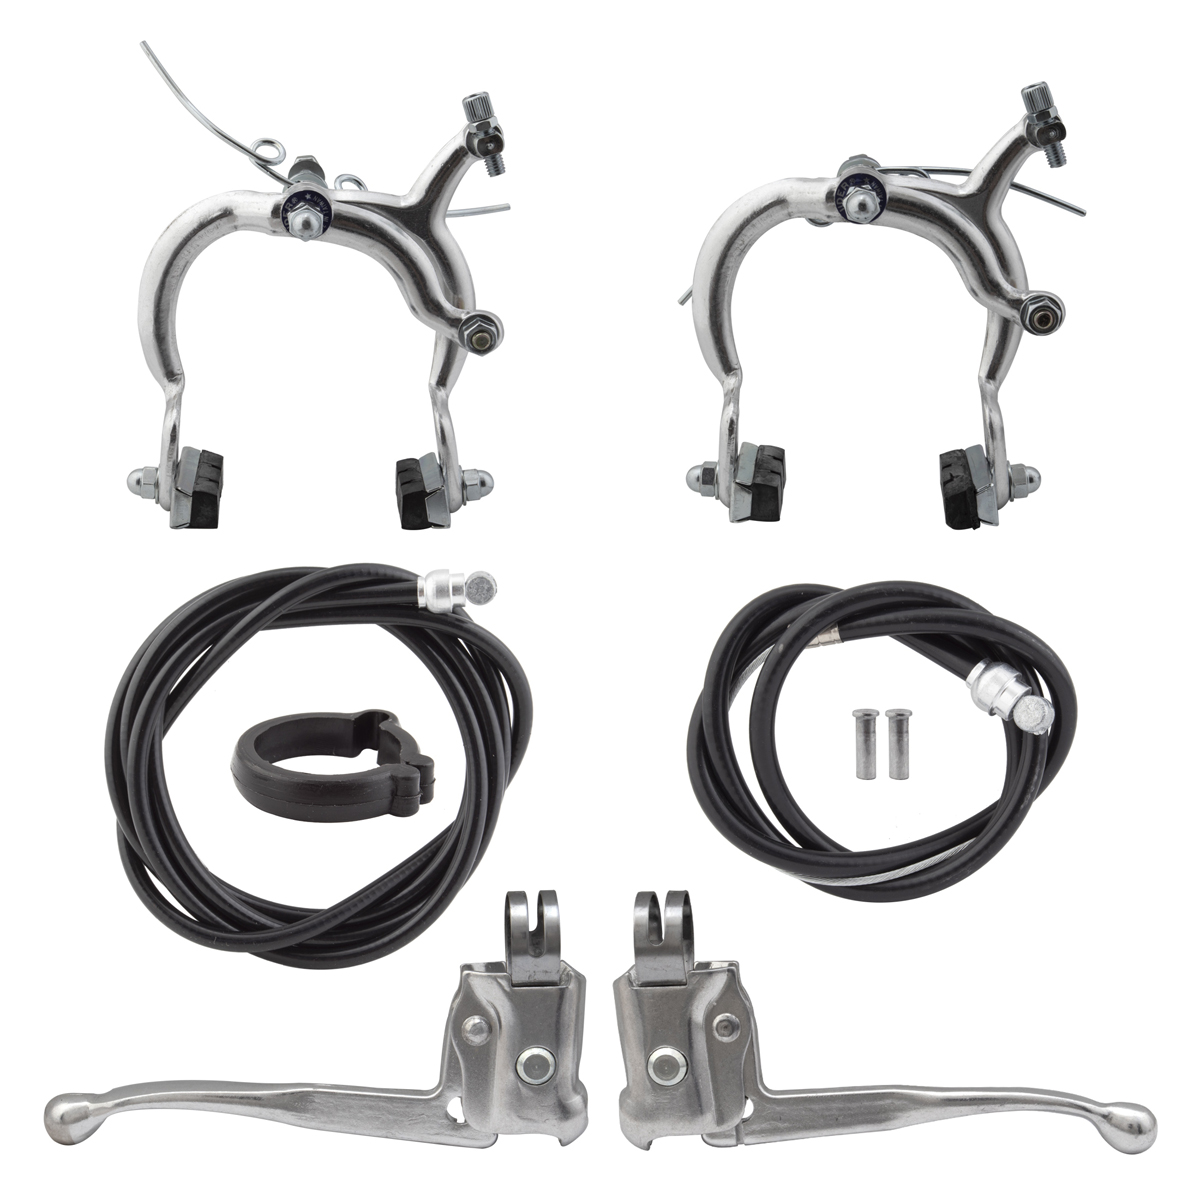 Brake set Alloy front and rear calipers with levers (silver)